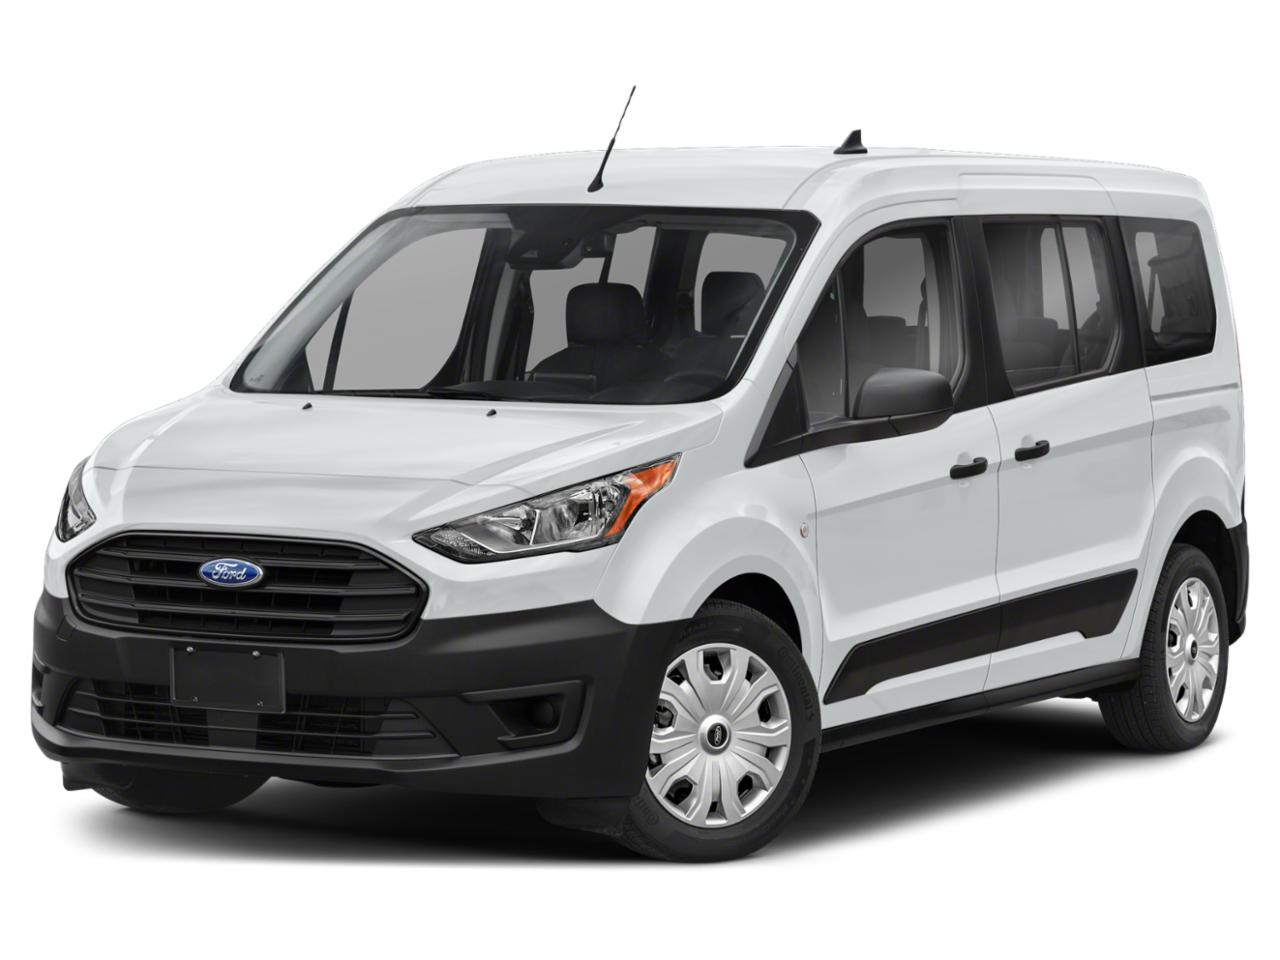 2019 Ford Transit Connect Wagon Vehicle Photo in Trevose, PA 19053